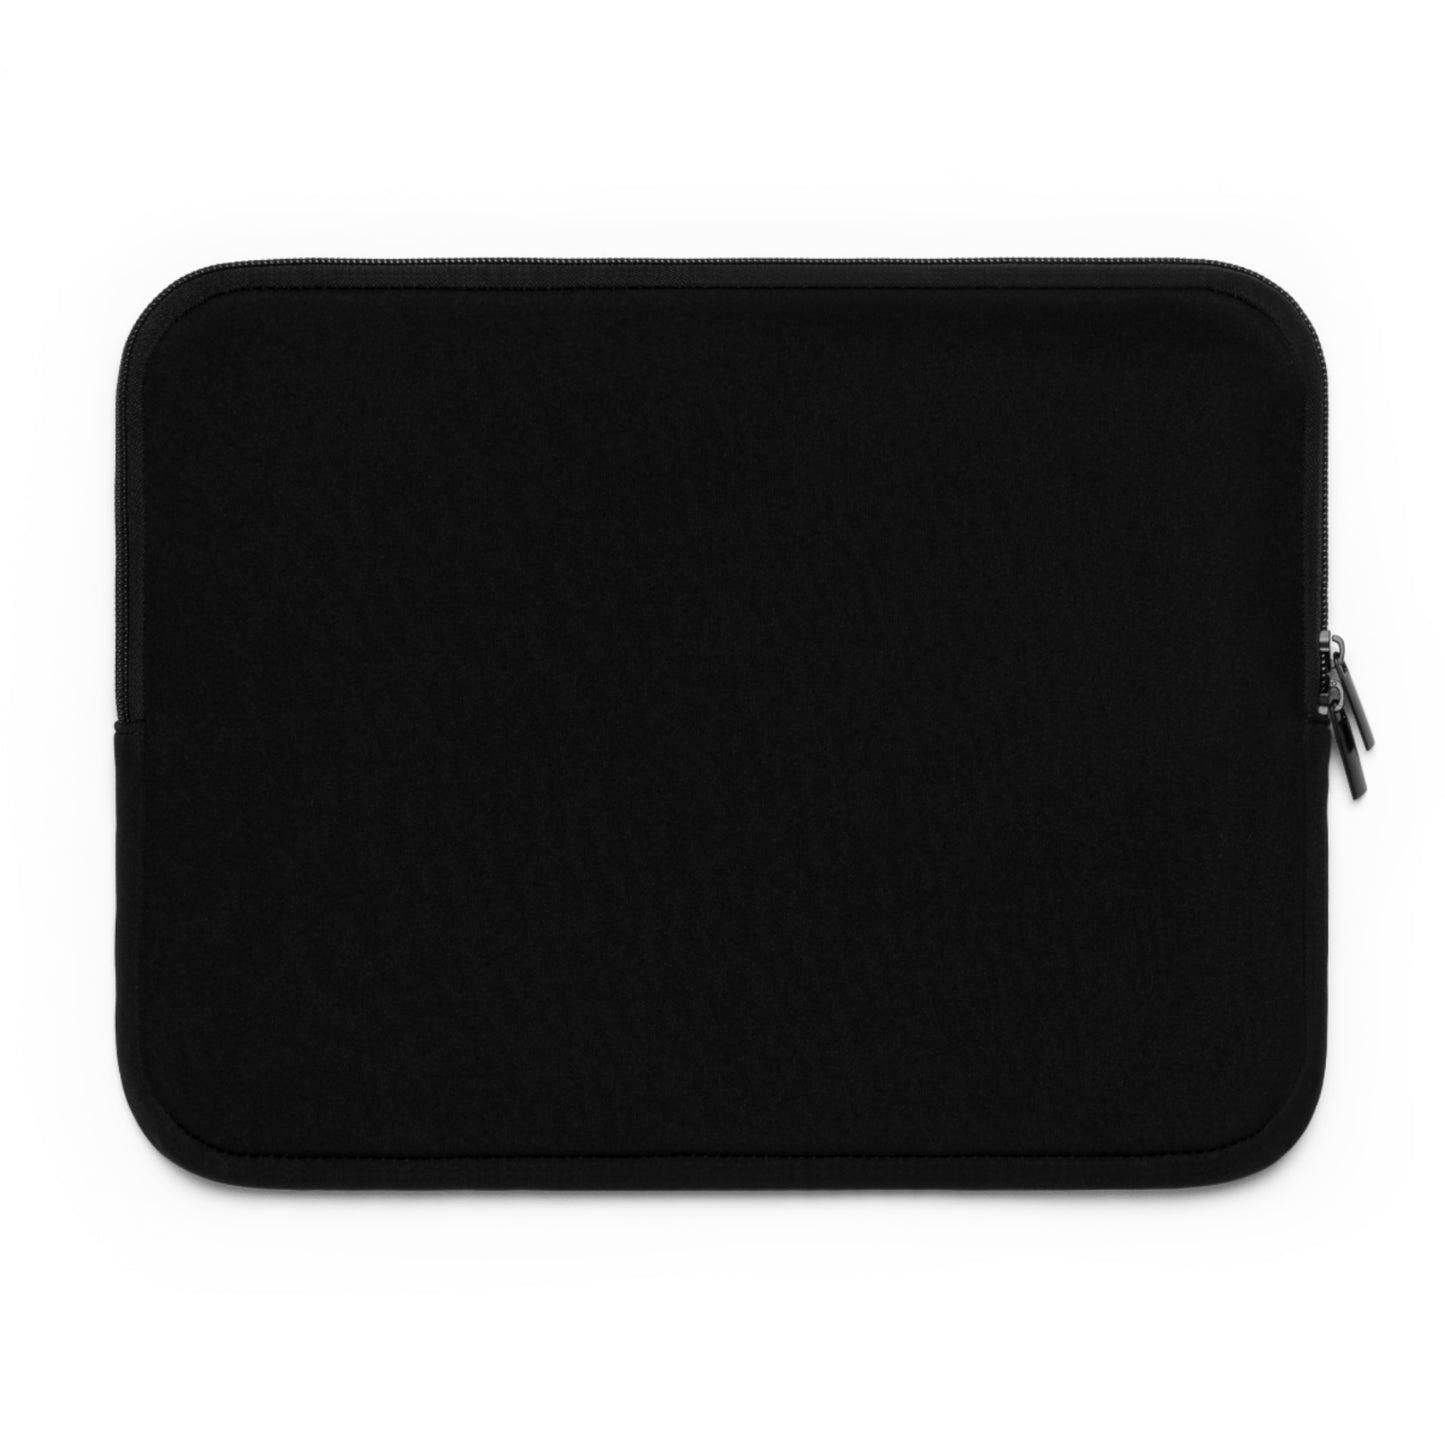 Stay Sparkly Spider Laptop Sleeve